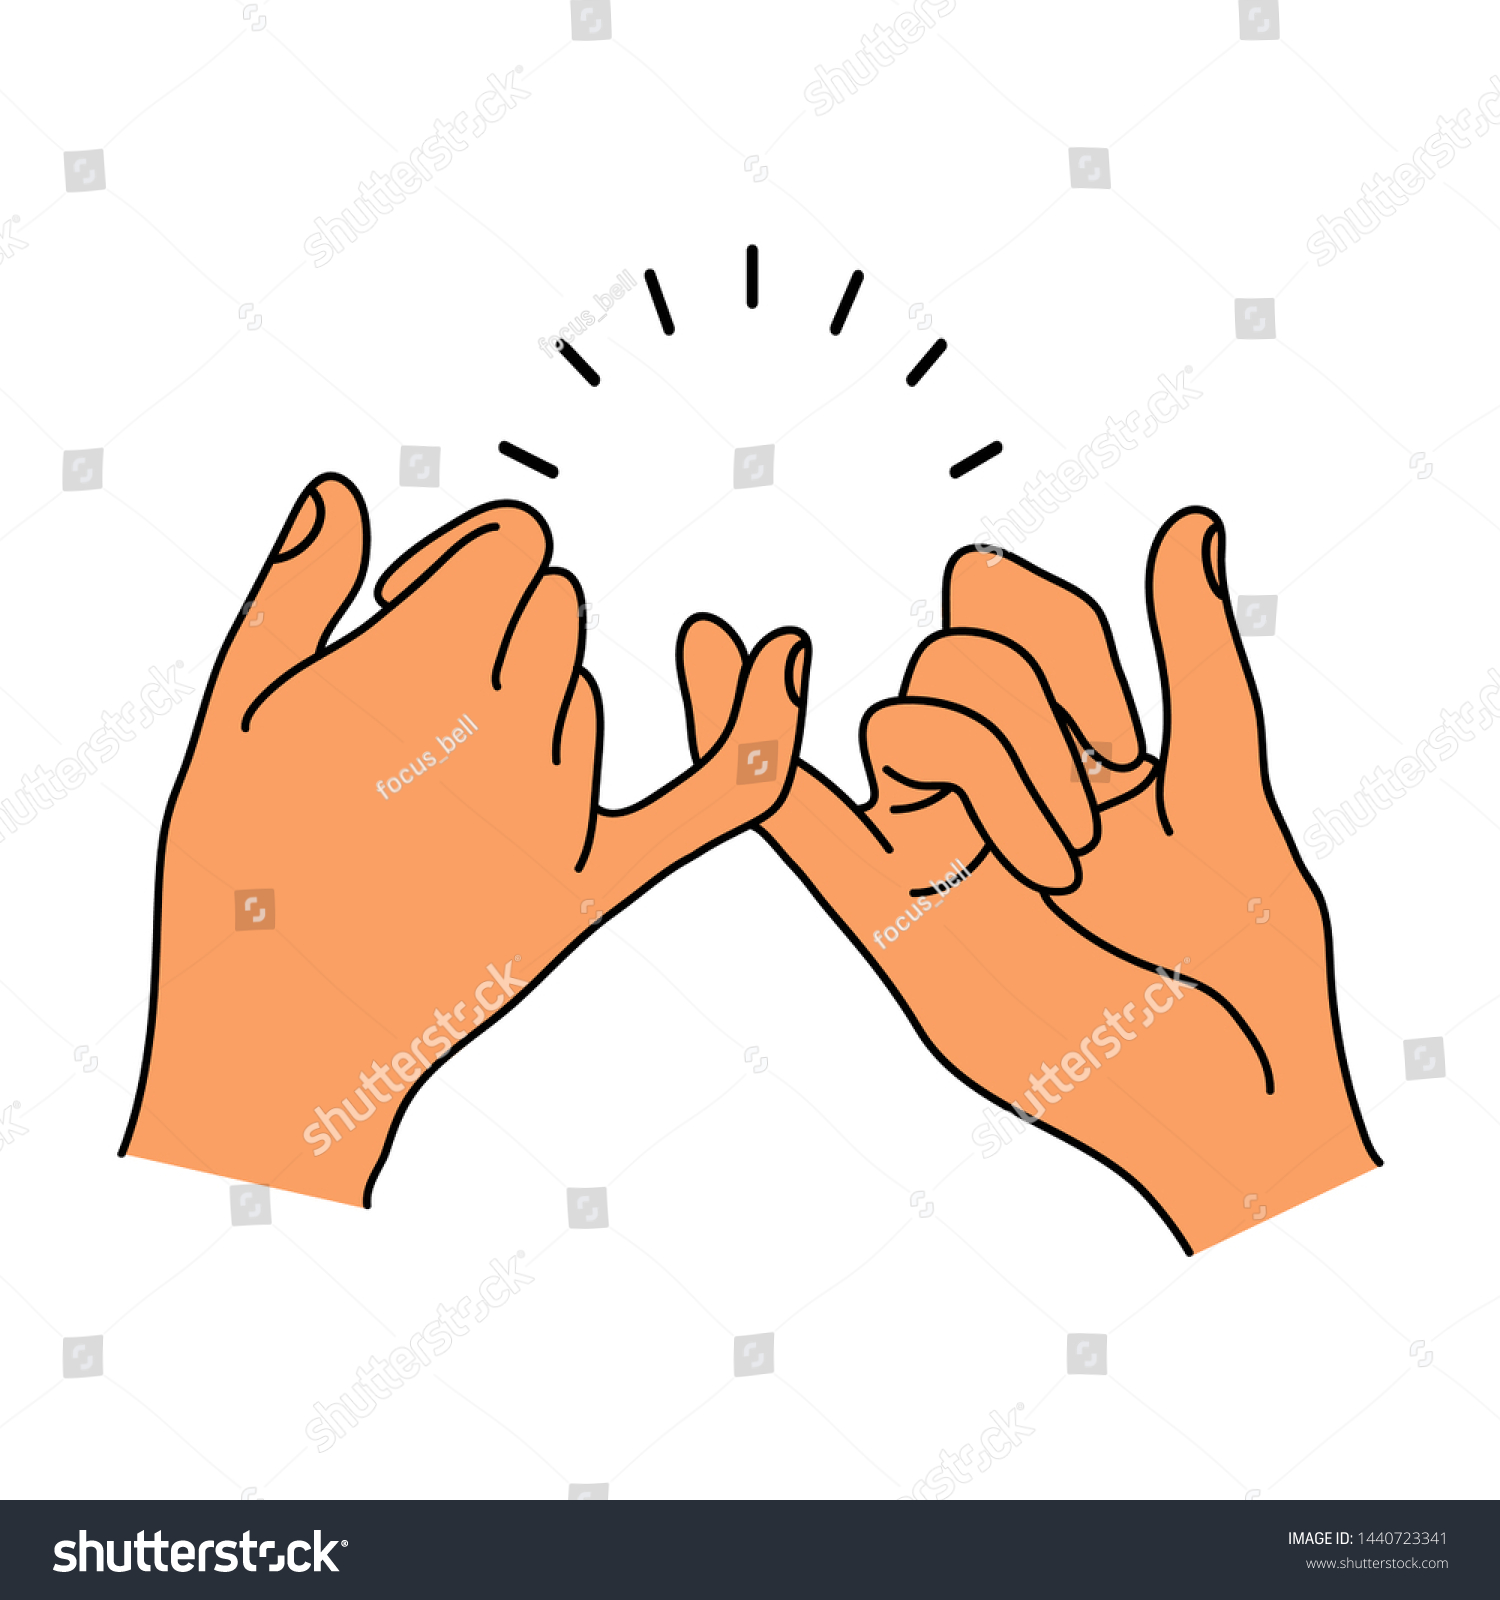 Pinky Promise Hands Gesturing Vector Stock Vector Royalty Free 1440723341 